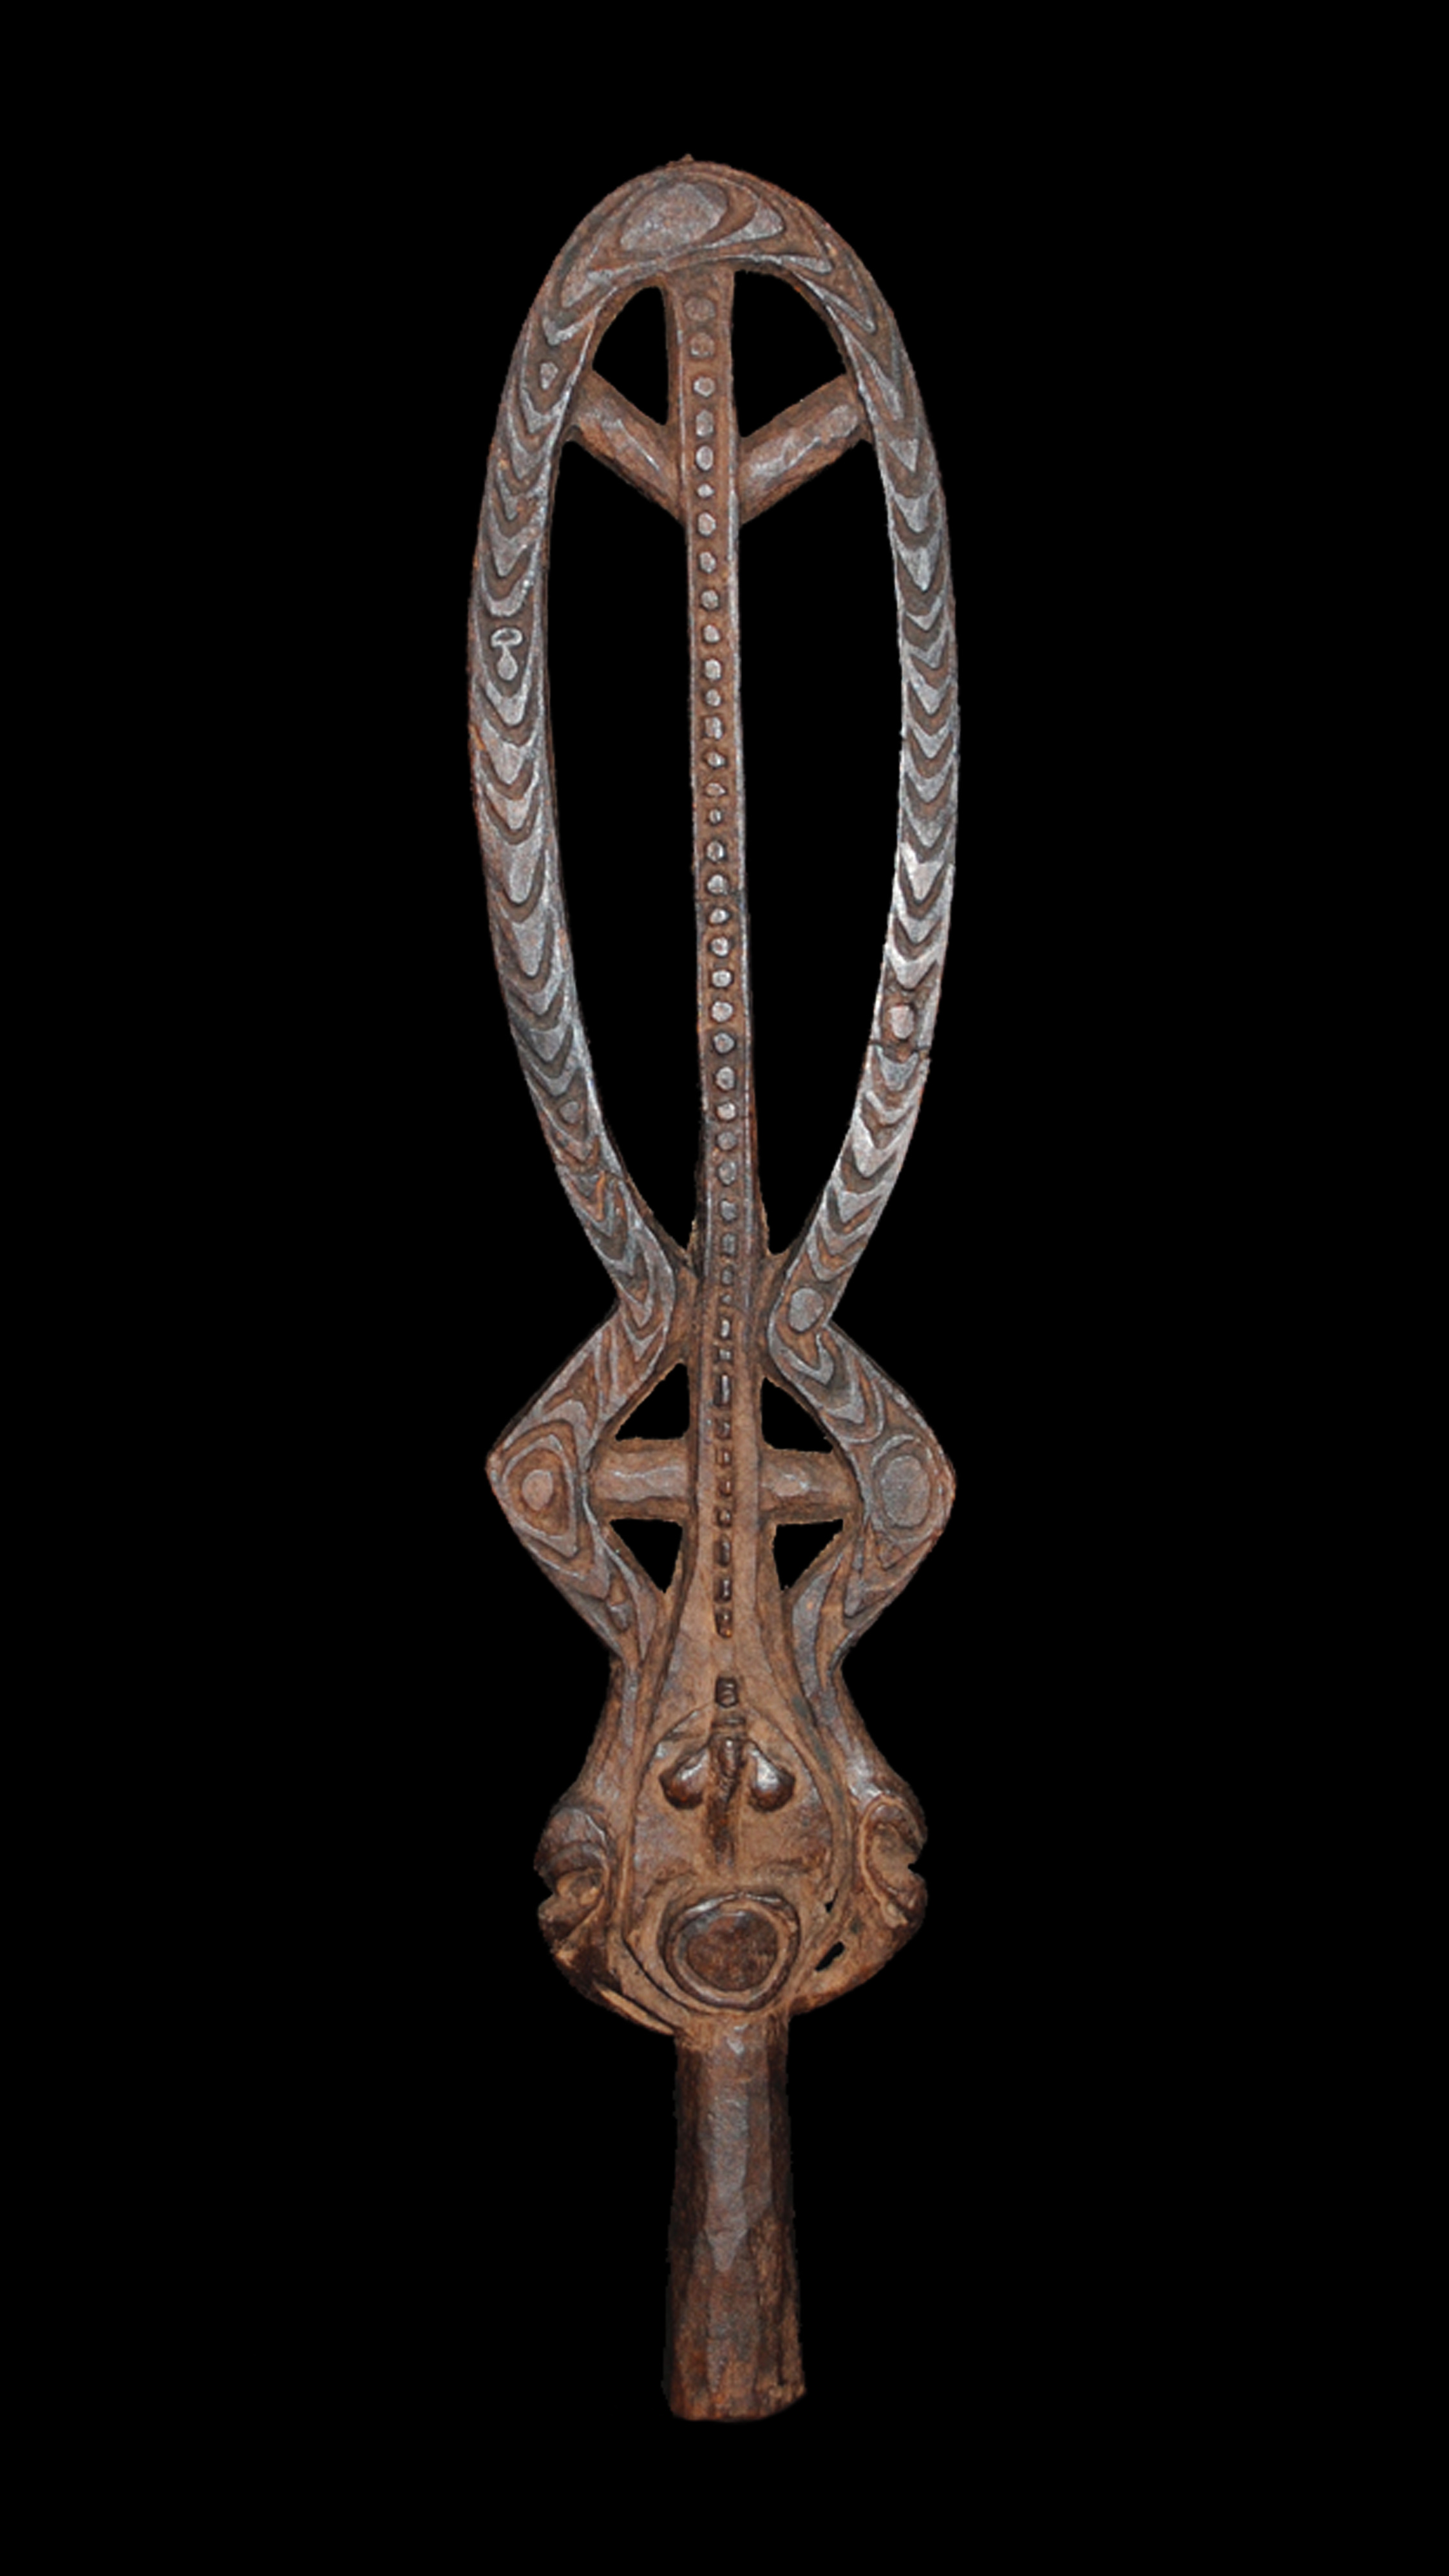 Lime Spatula Finial Sepik River Papua New Guinea,19th to Early 20th Century